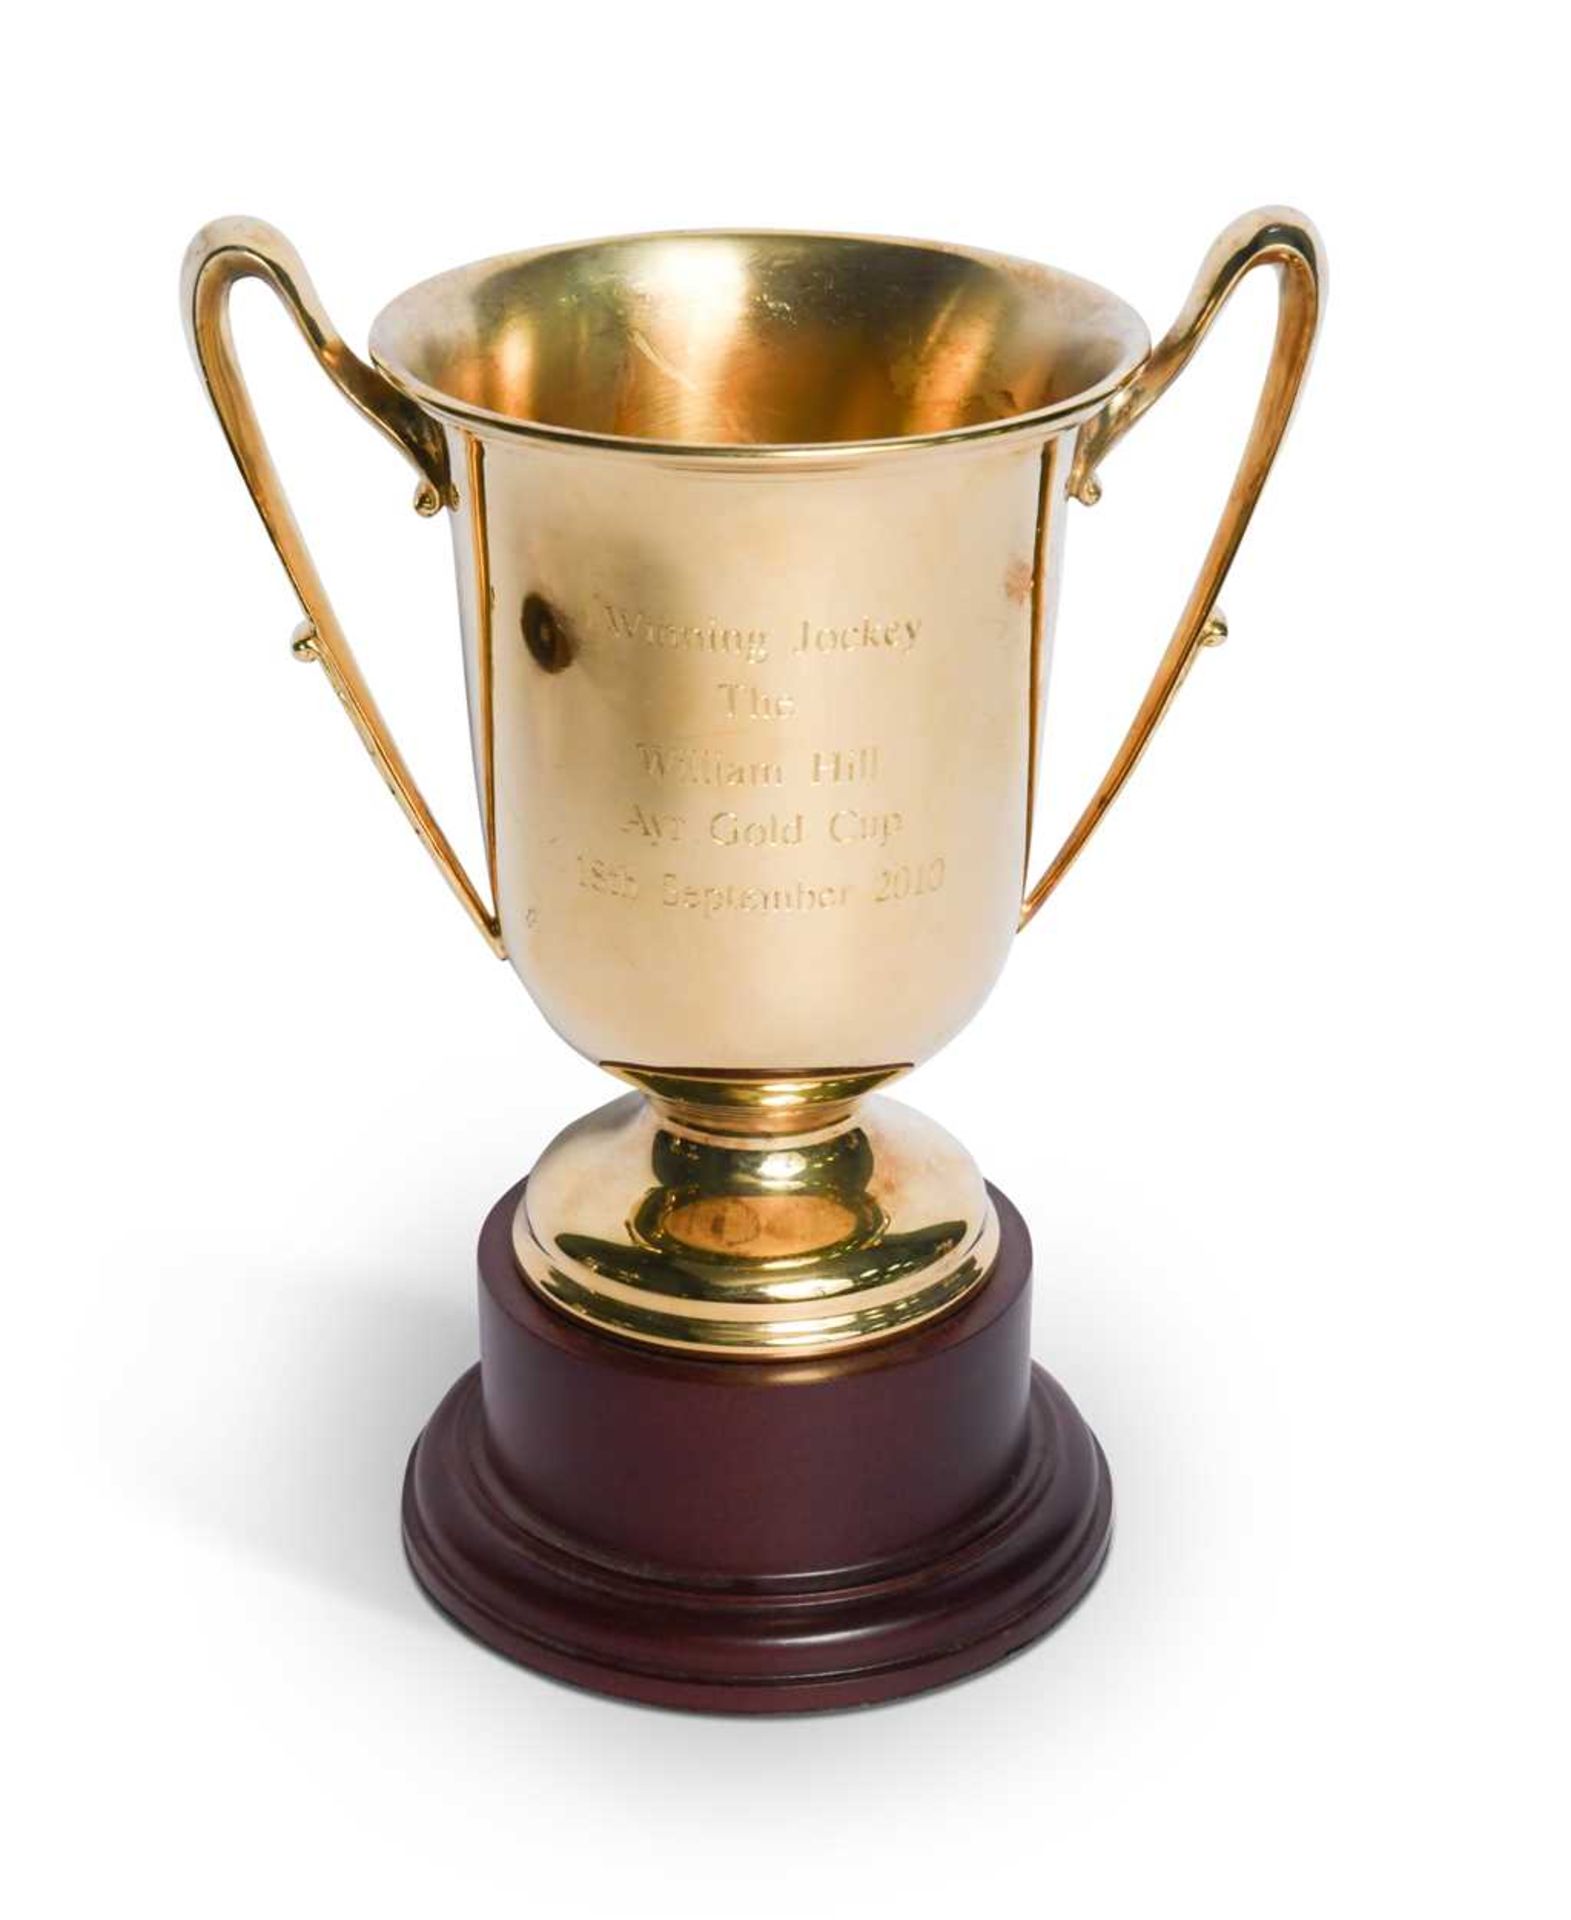 A William Hill Ayr Gold Cup trophy, awarded to Frankie Dettori,